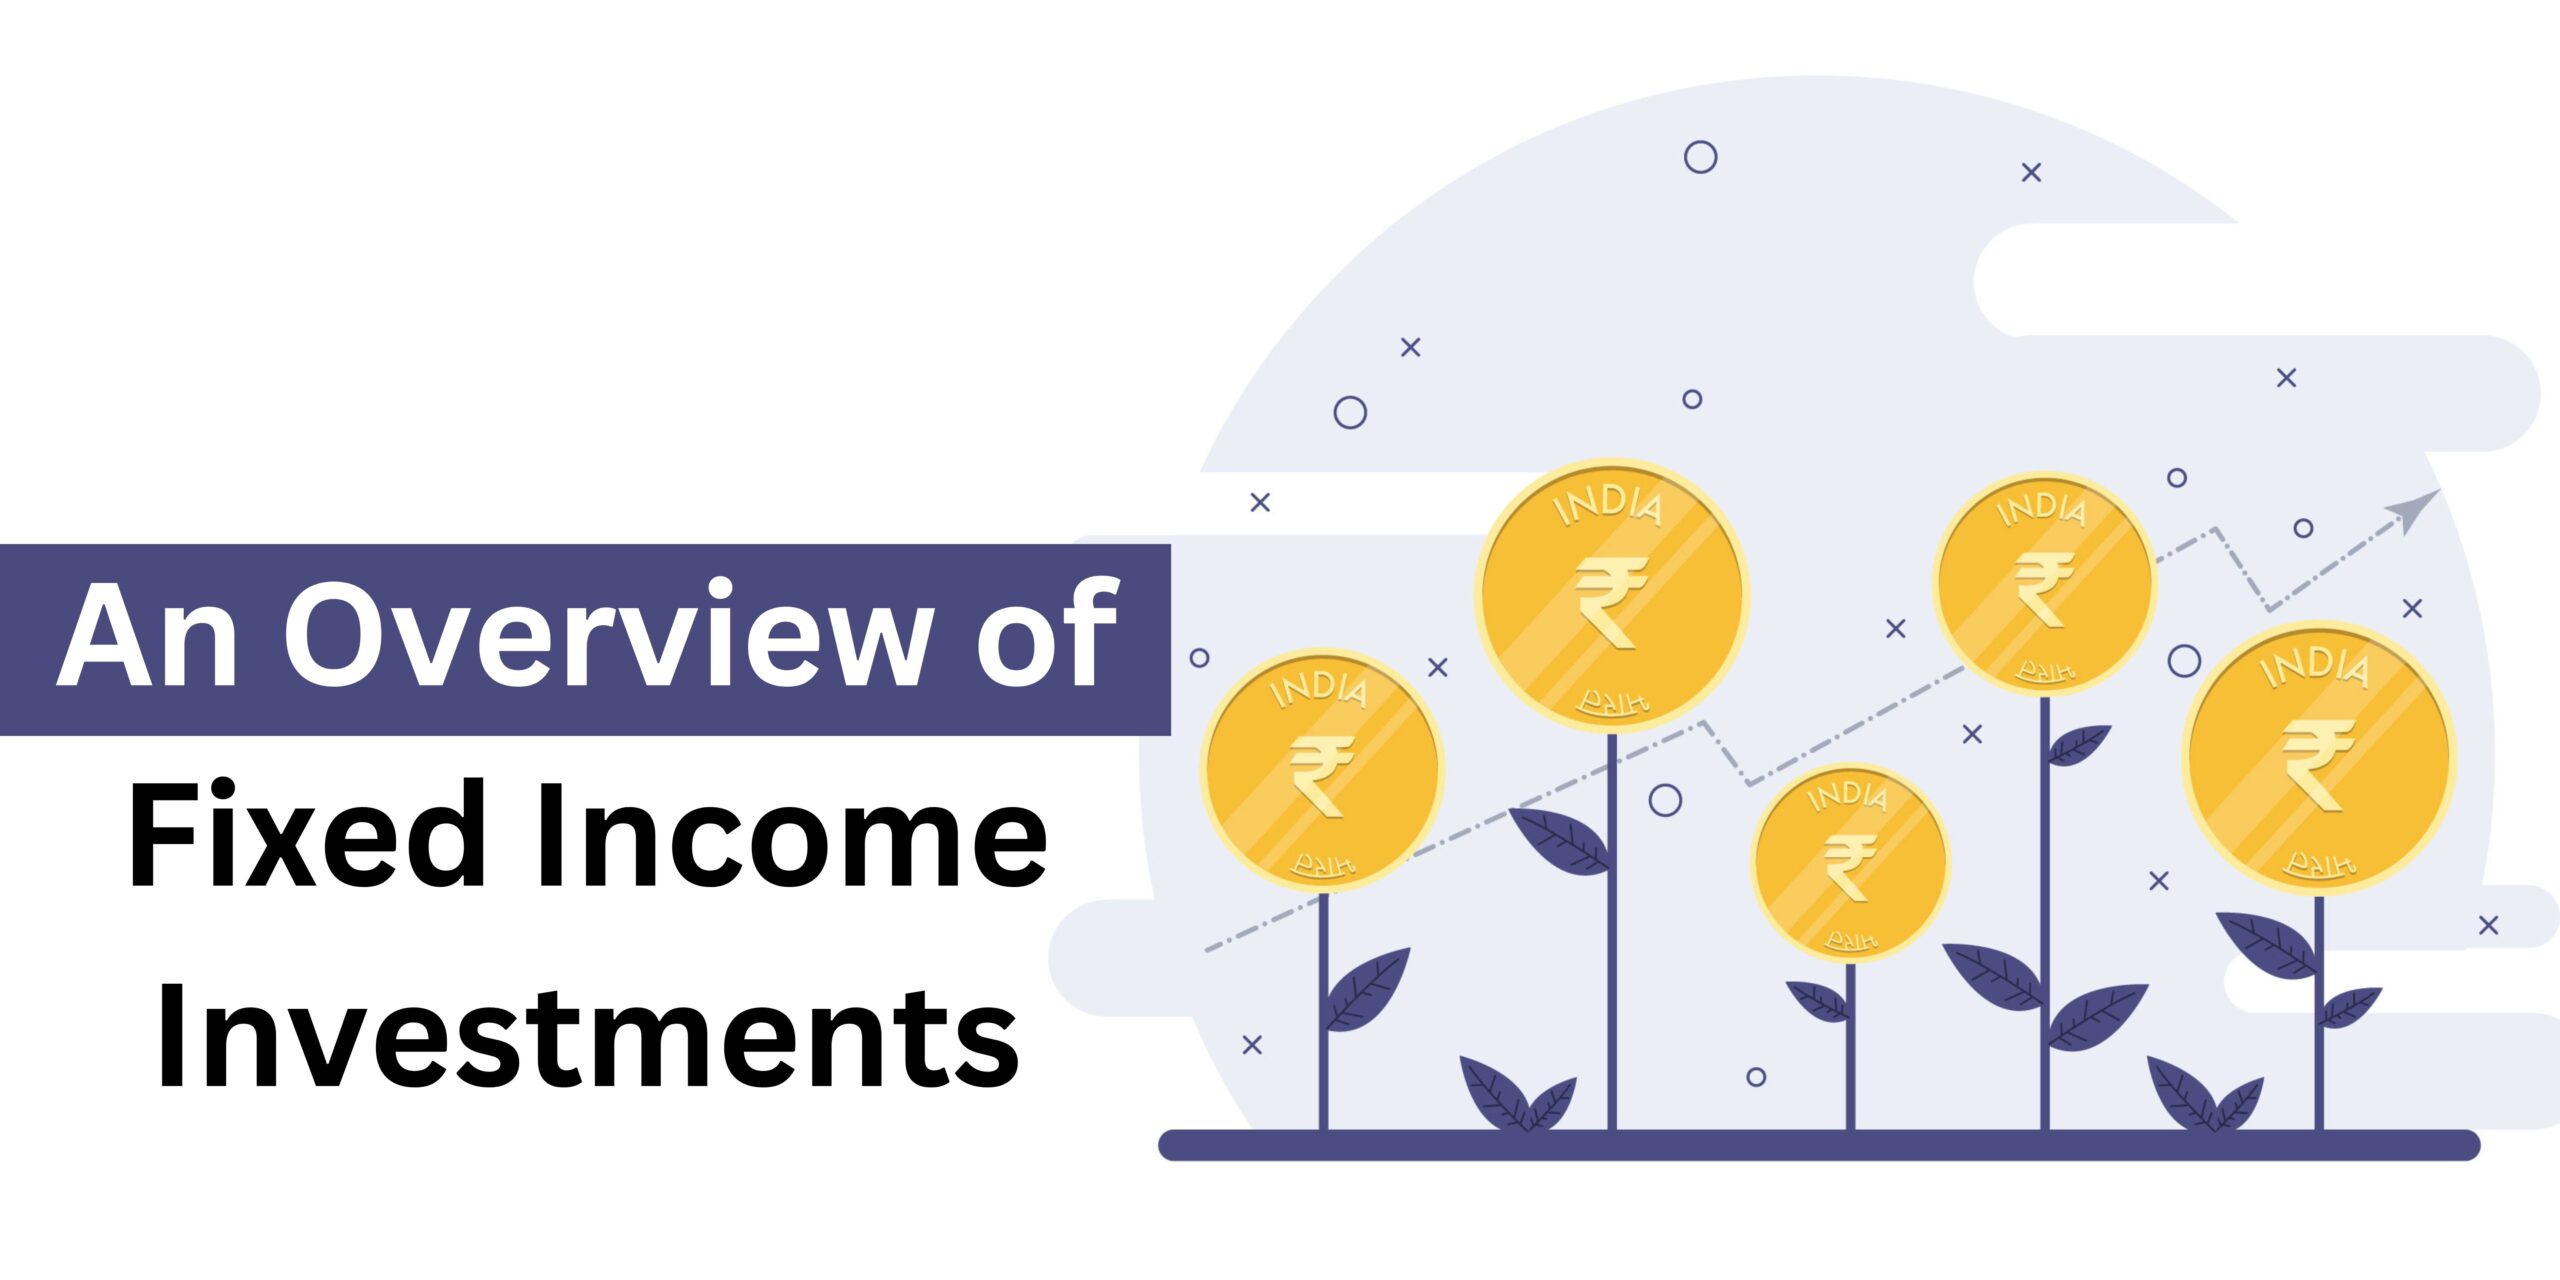 An Overview of Fixed Income Investments